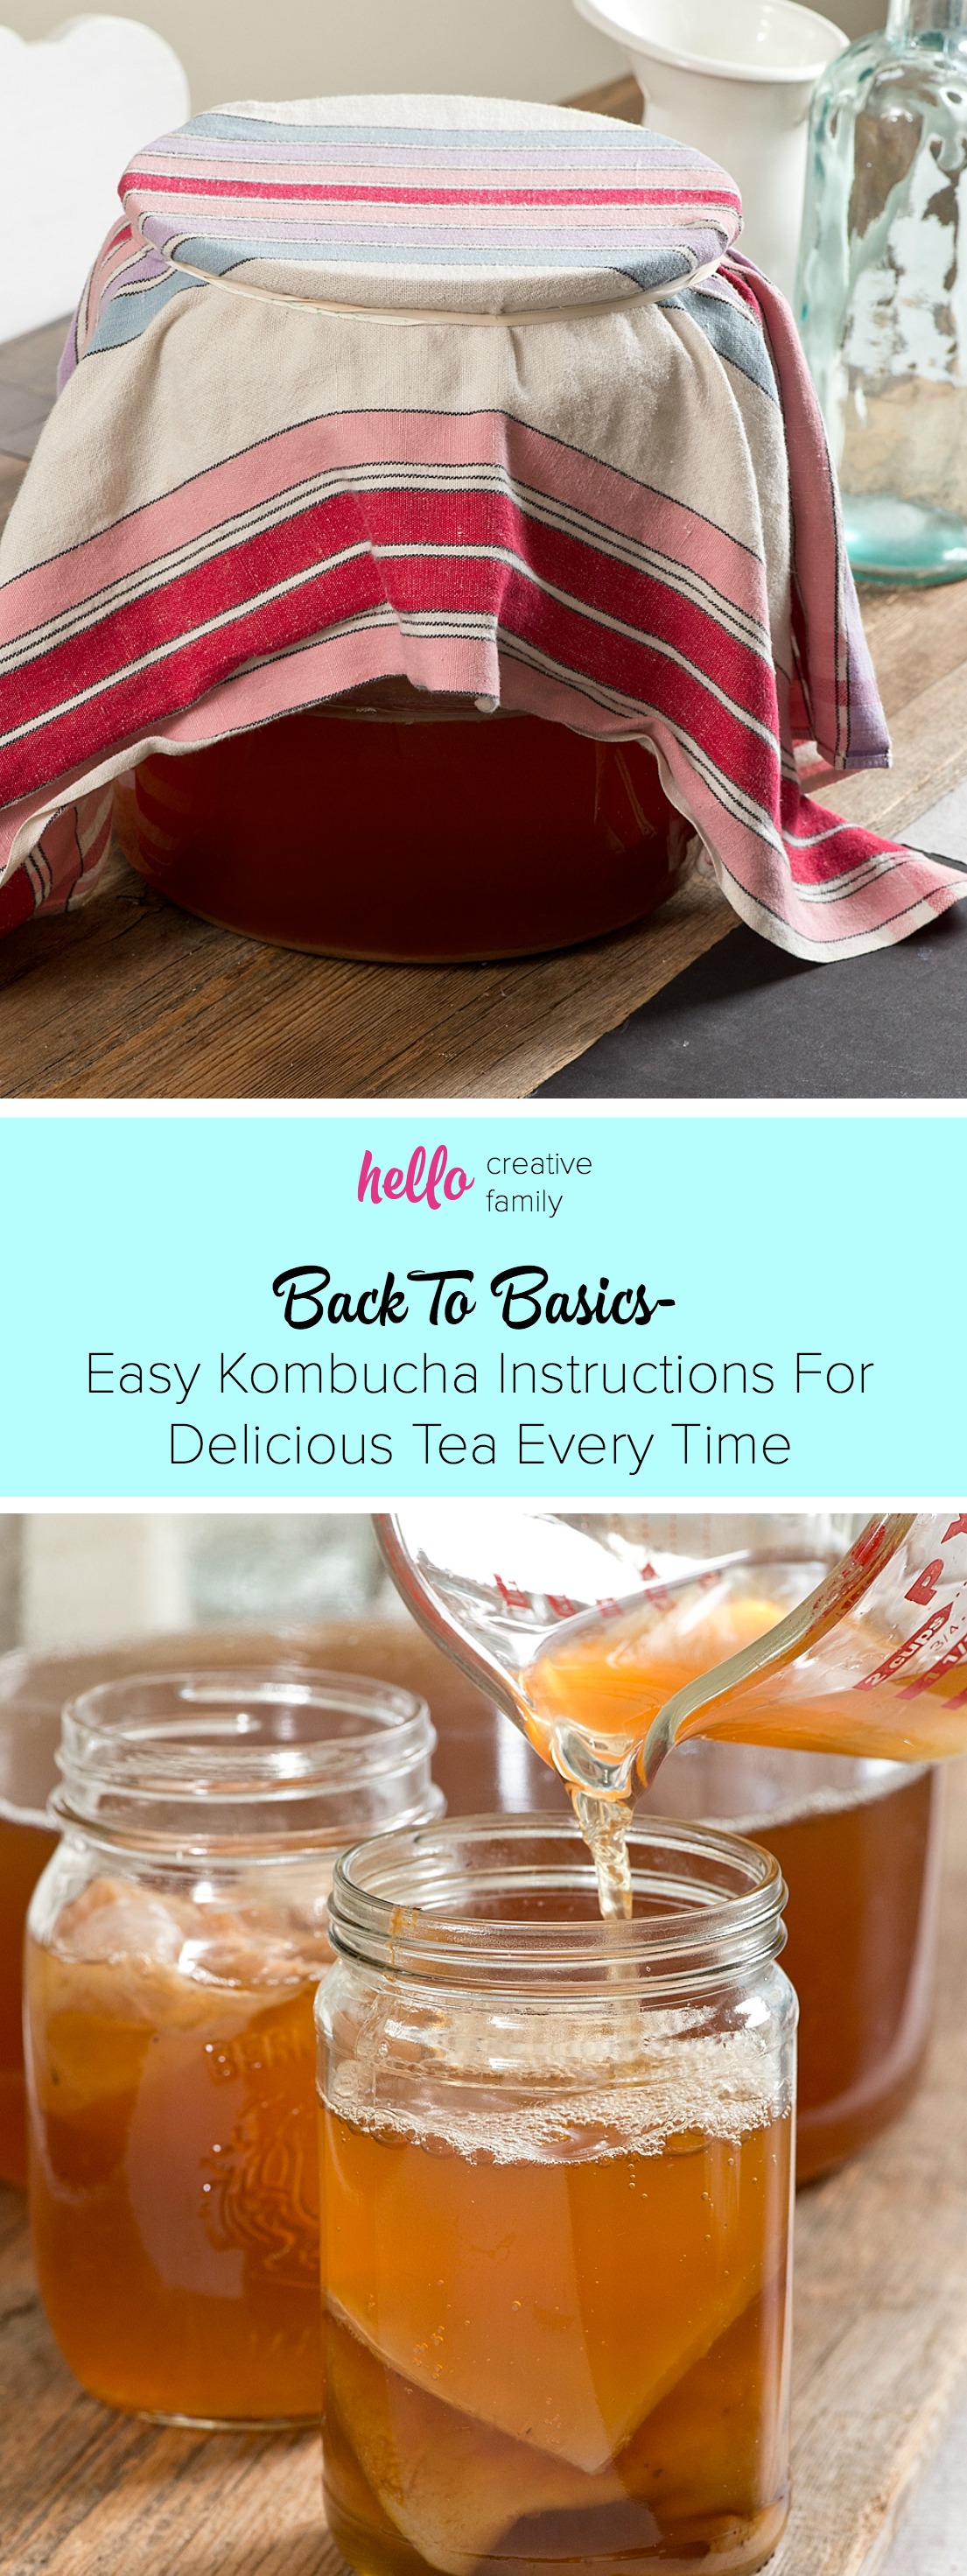 Skip the store bought and brew your own kombucha right at home with these Easy Kombucha instructions for perfect tea every time. The step by step instructions with photos make it easy!